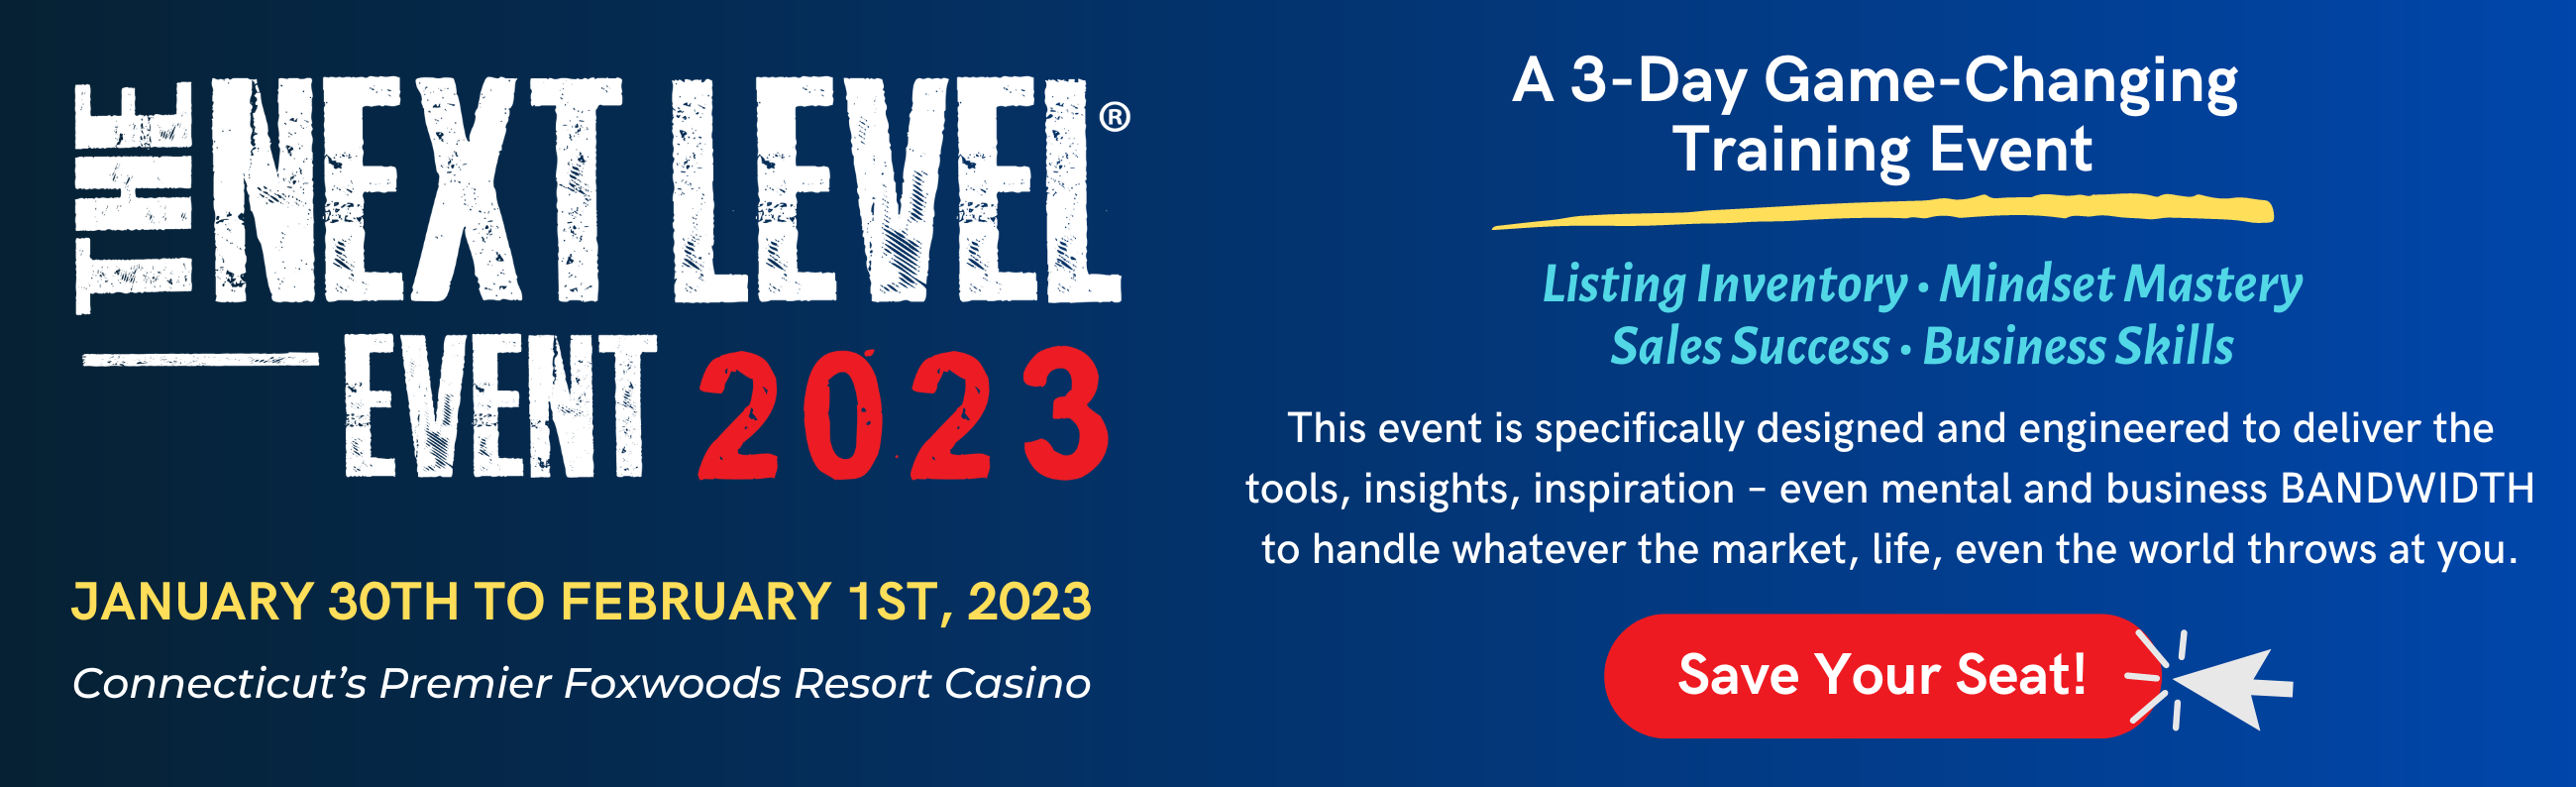 The 2023 Next Level® Real Estate Event